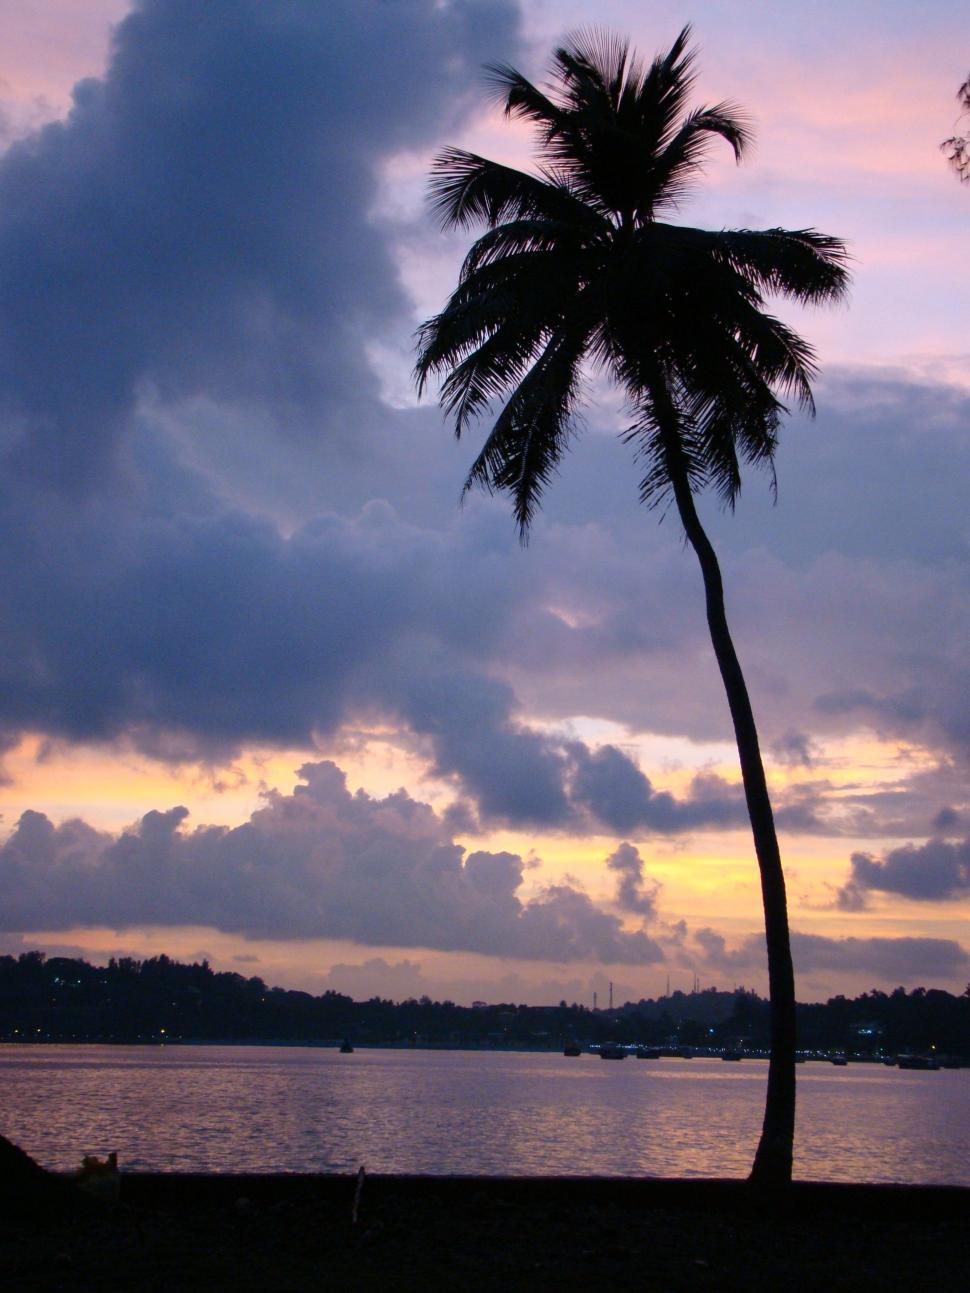 Free Image of Palm Tree Beside Water 